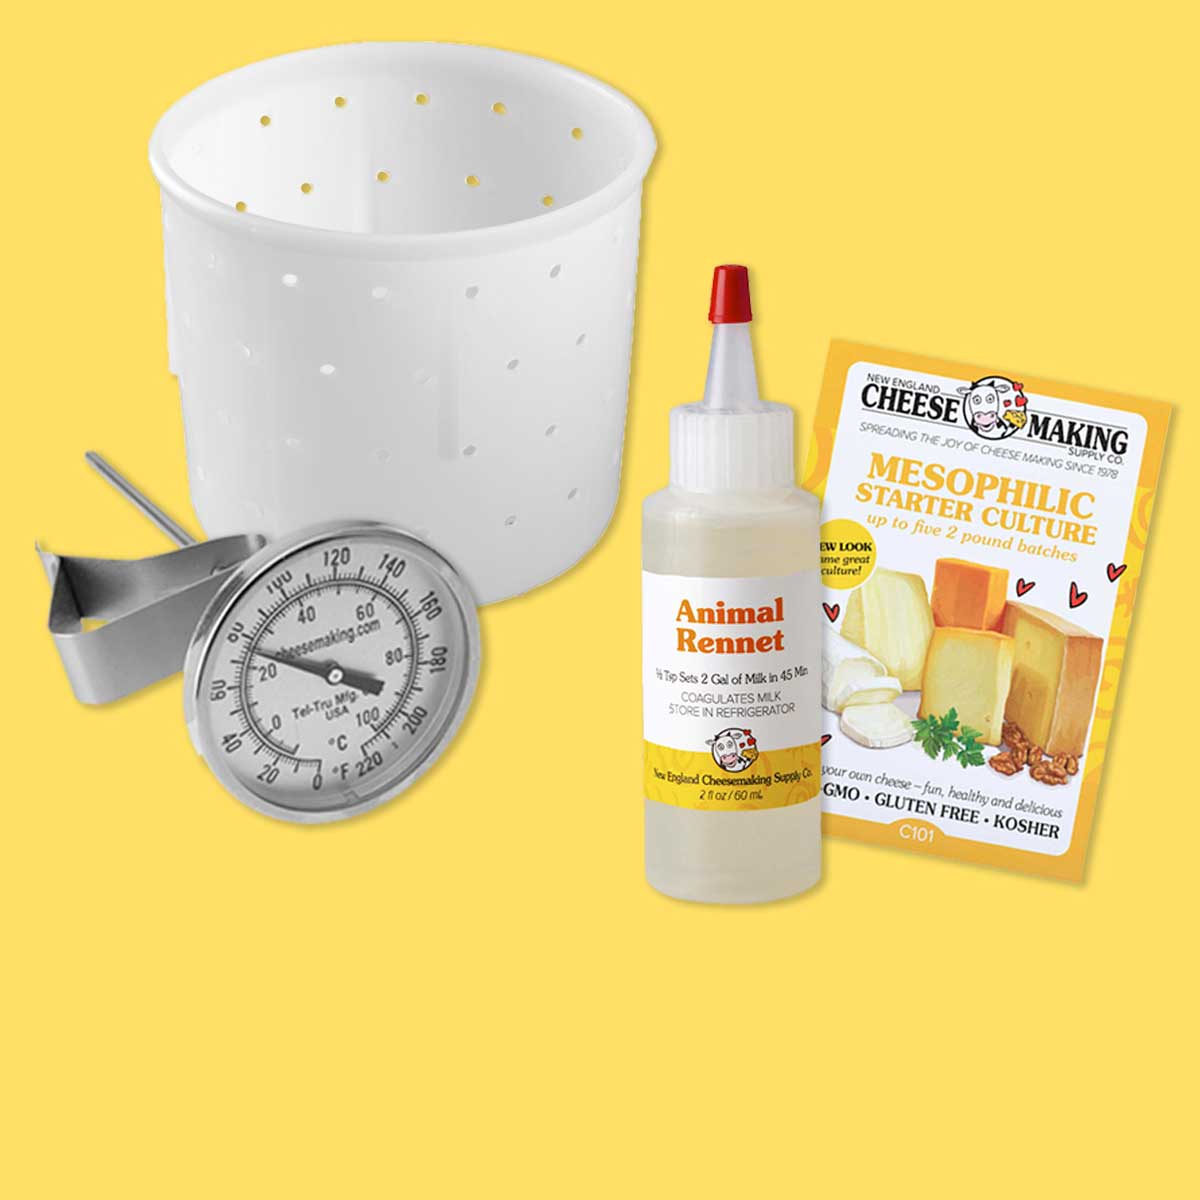 Small cheese mold, stainless steel thermometer, bottle of liquid rennet and mesophilic culture for making cheese at home